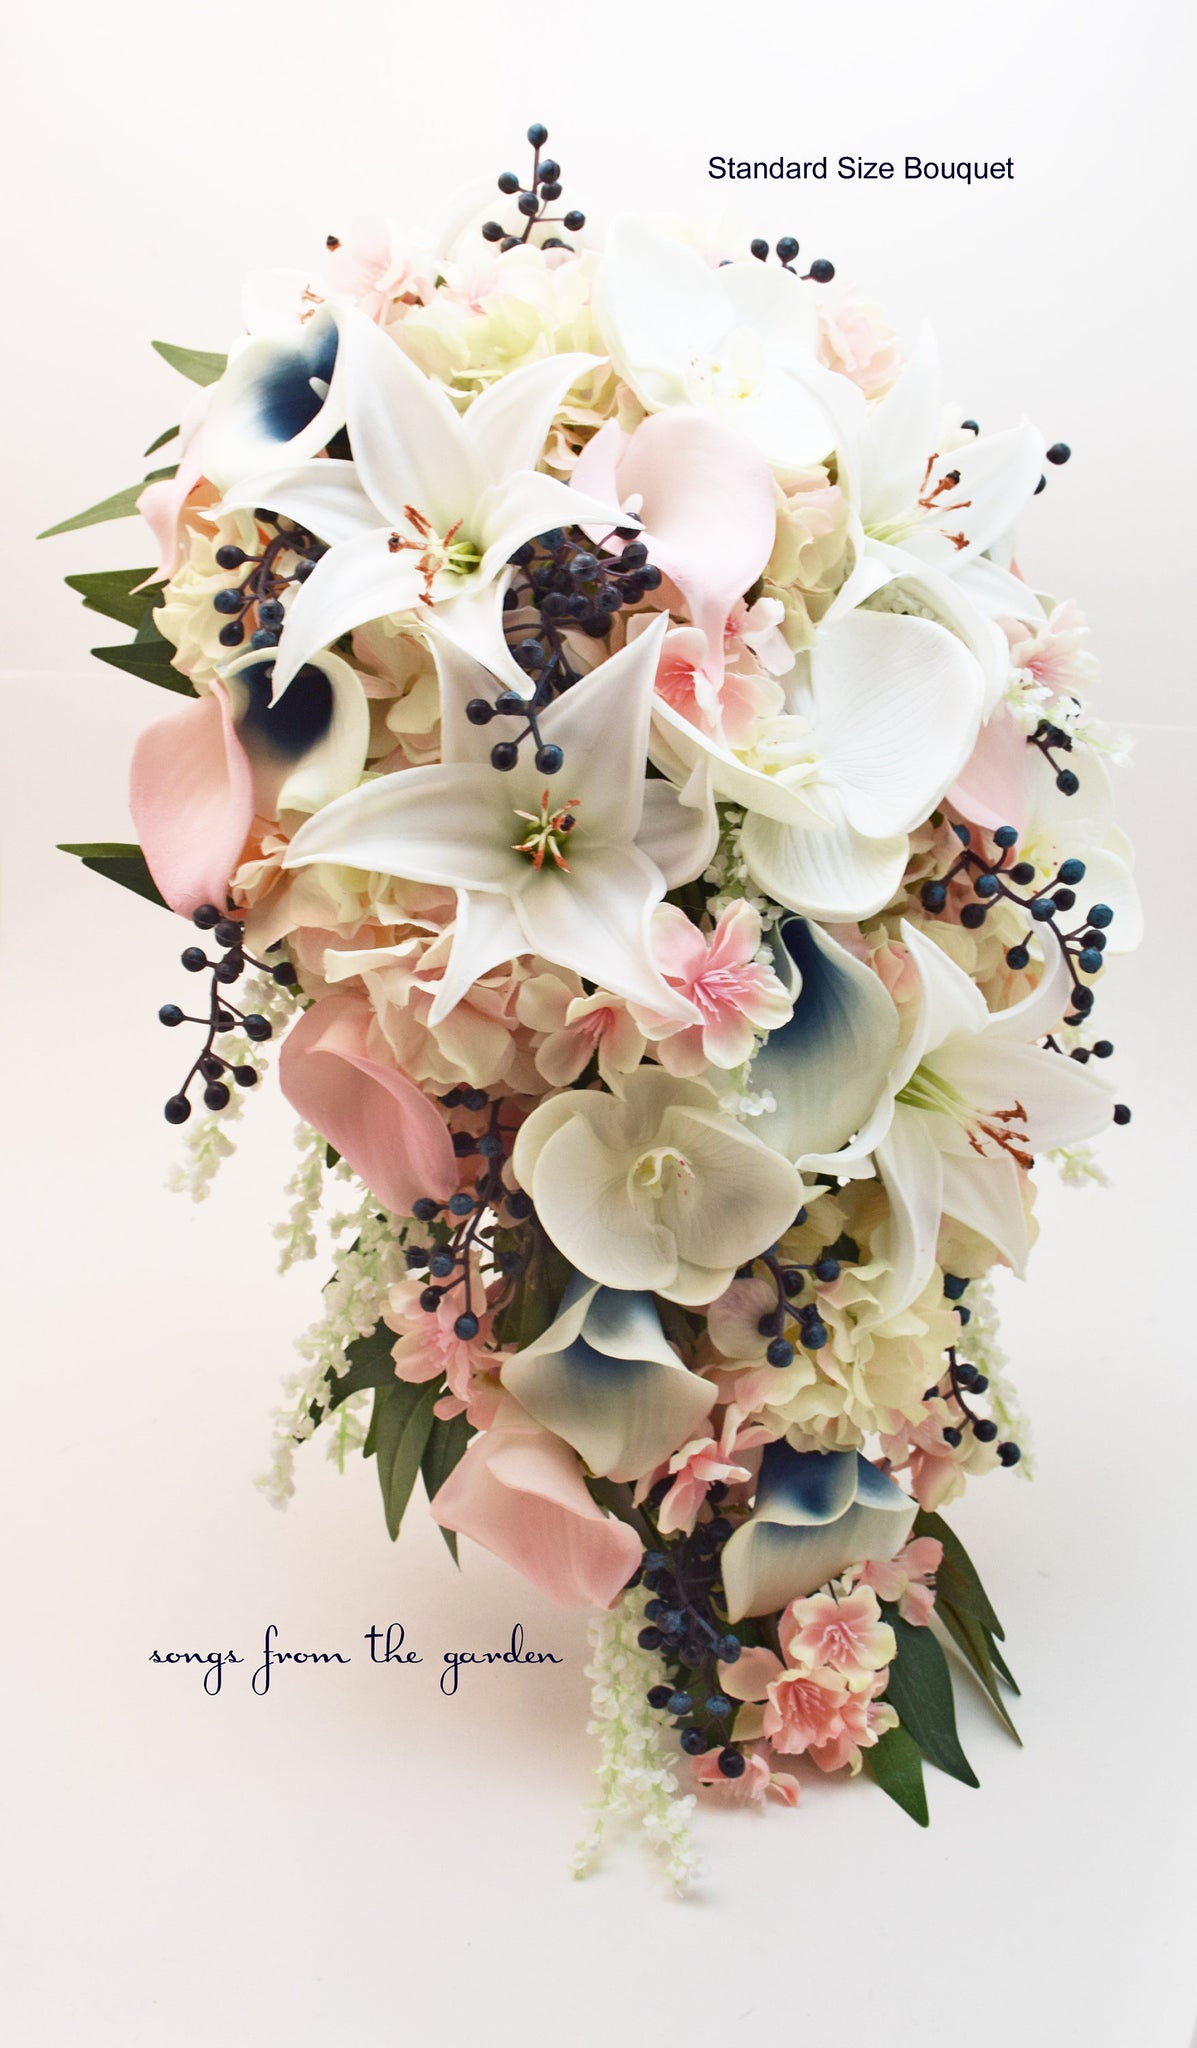 Navy Pink Blush White Cascade Bridal Bouquet Cherry Blossom Orchids Lily - add Bridesmaids Centerpieces Boutonnieres Corsages and More!